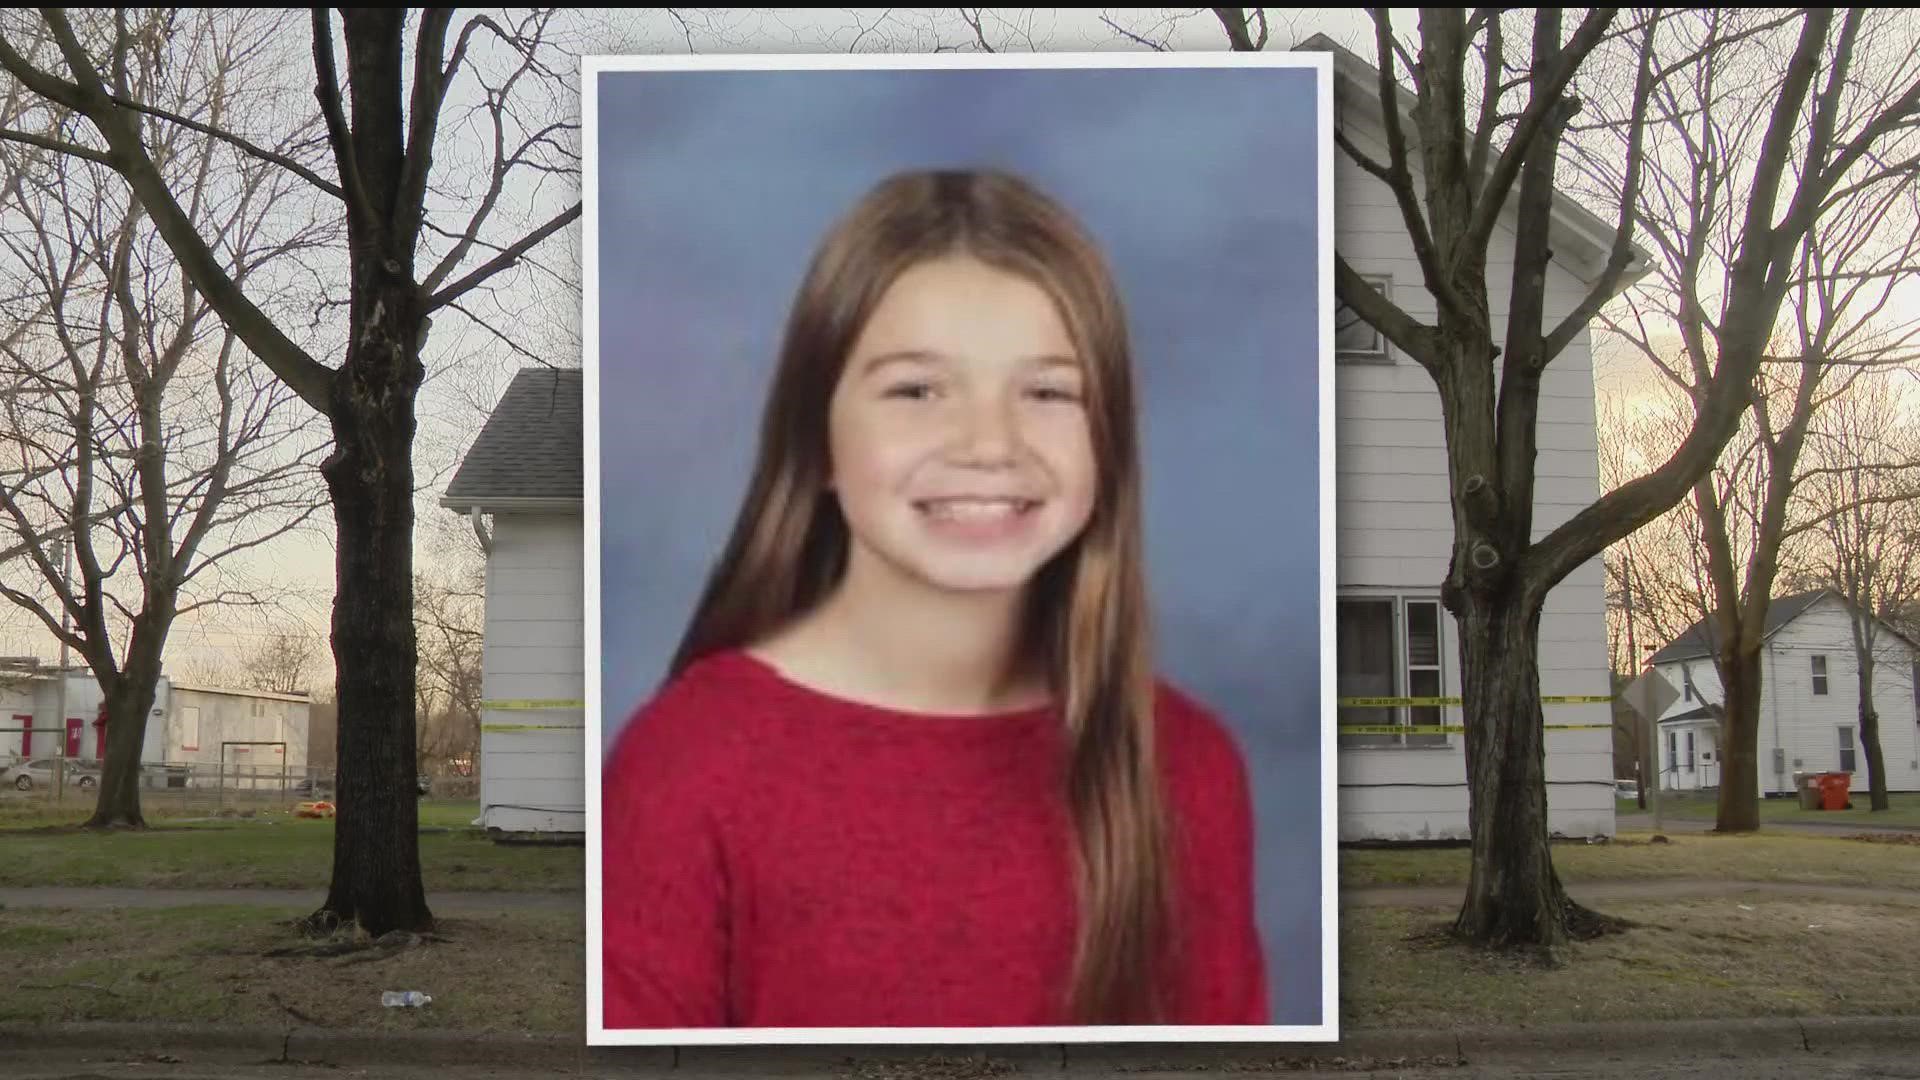 Residents of Chippewa Falls, Wisconsin say the killing of 10-year-old Lily Peters rocked their small community, and left them with more questions than answers.